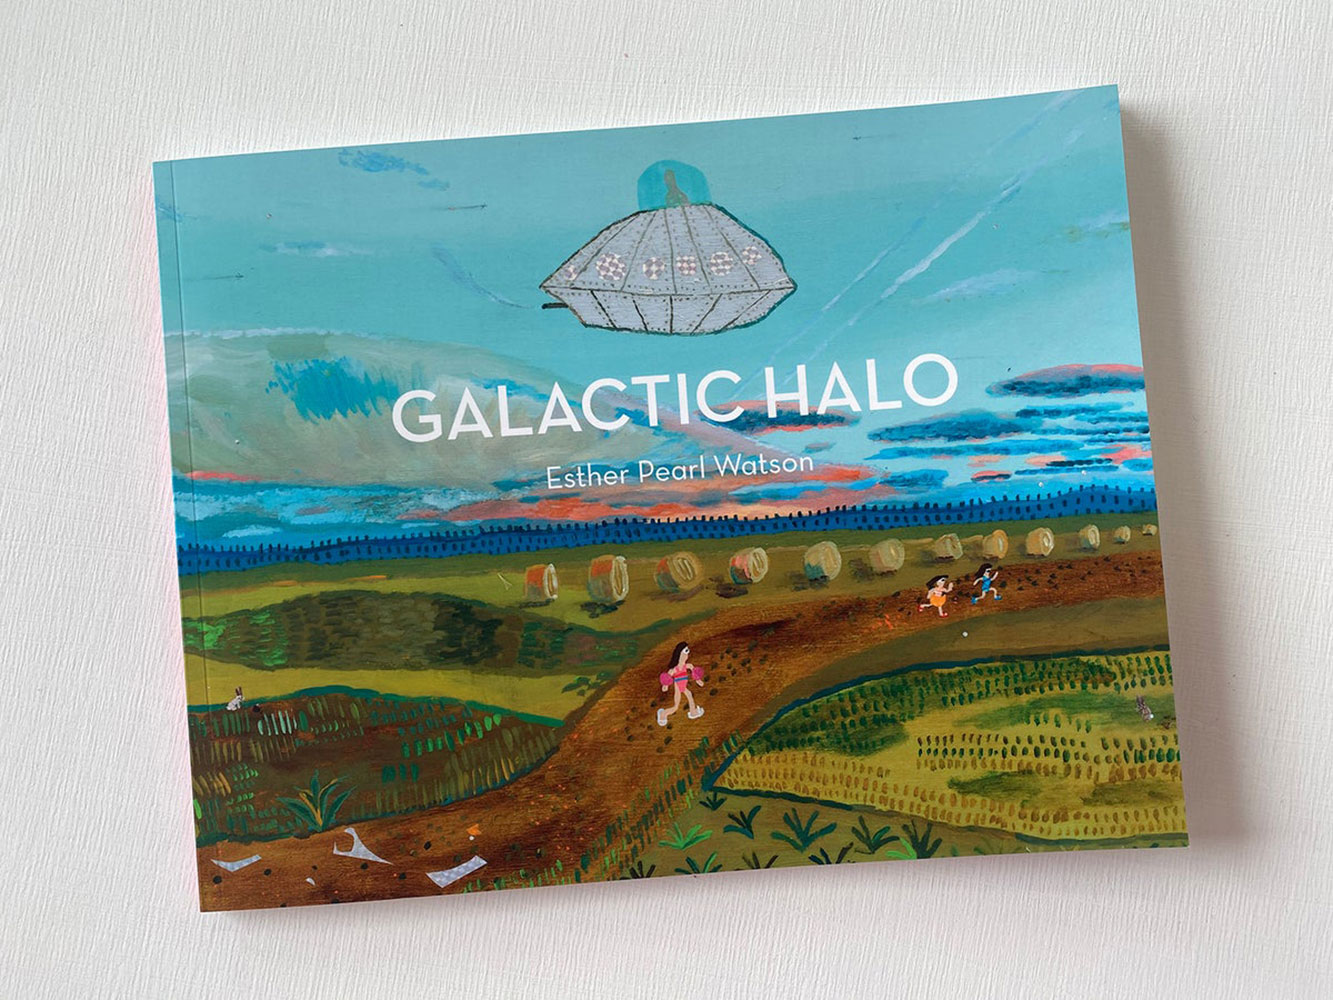 Galactic Halo, Esther Pearl Watson, Introduction with sketchbook pages and selection of recent works, 2018 – 2020, 72 full color pages, softcover, signed,8 ½” x 11”